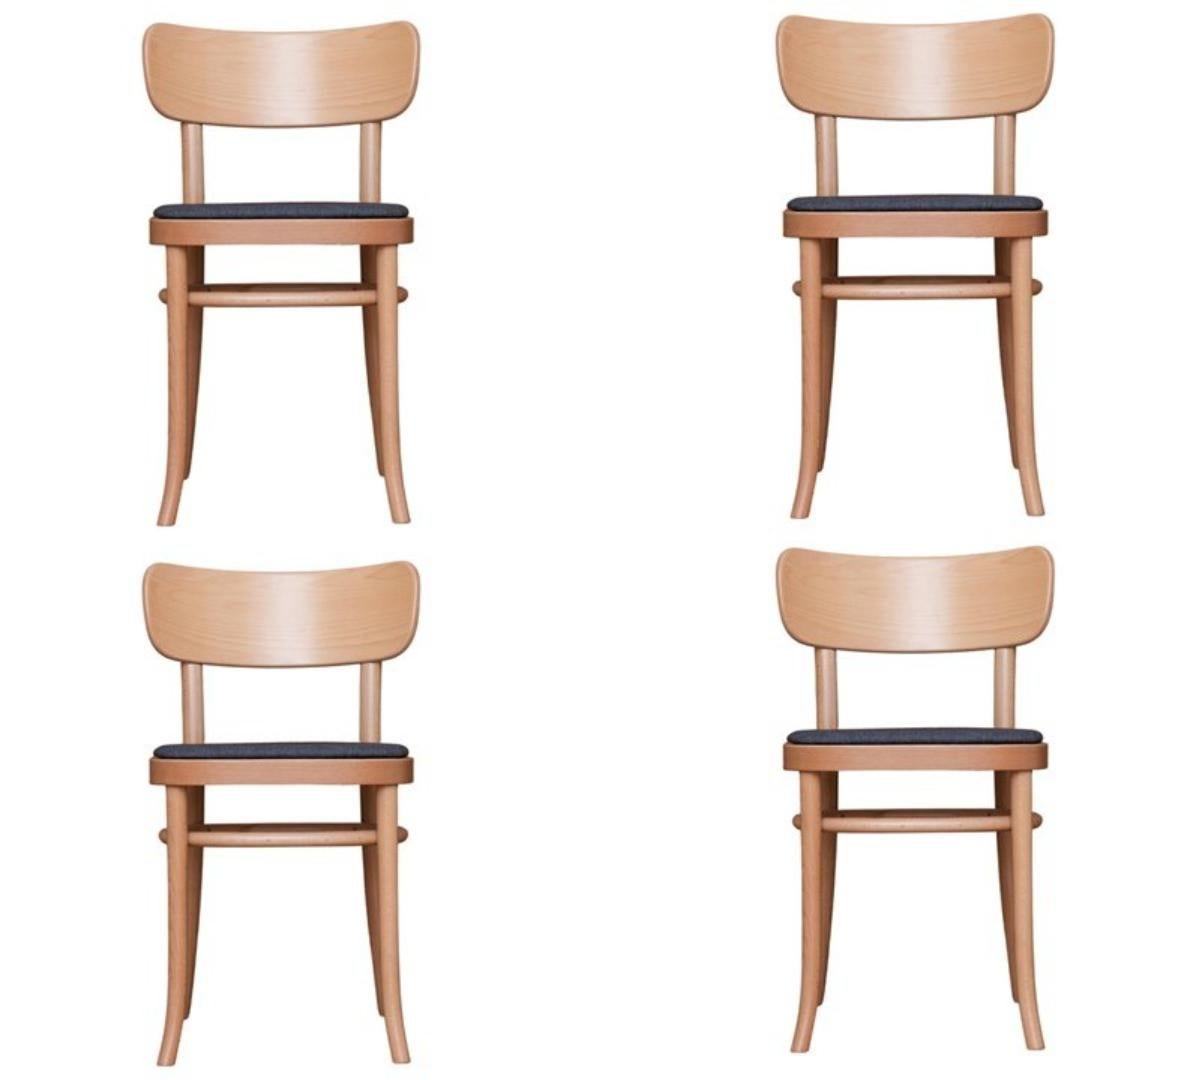 Set Of 4 MZO Chairs by Mazo Design
Dimensions: W 46 x D 50 x H 75 cm
Materials: Beech.

This iconic chair played a leading role in one of the fairy tales of Danish furniture design. However – more curiously – it is also on display at The Workers